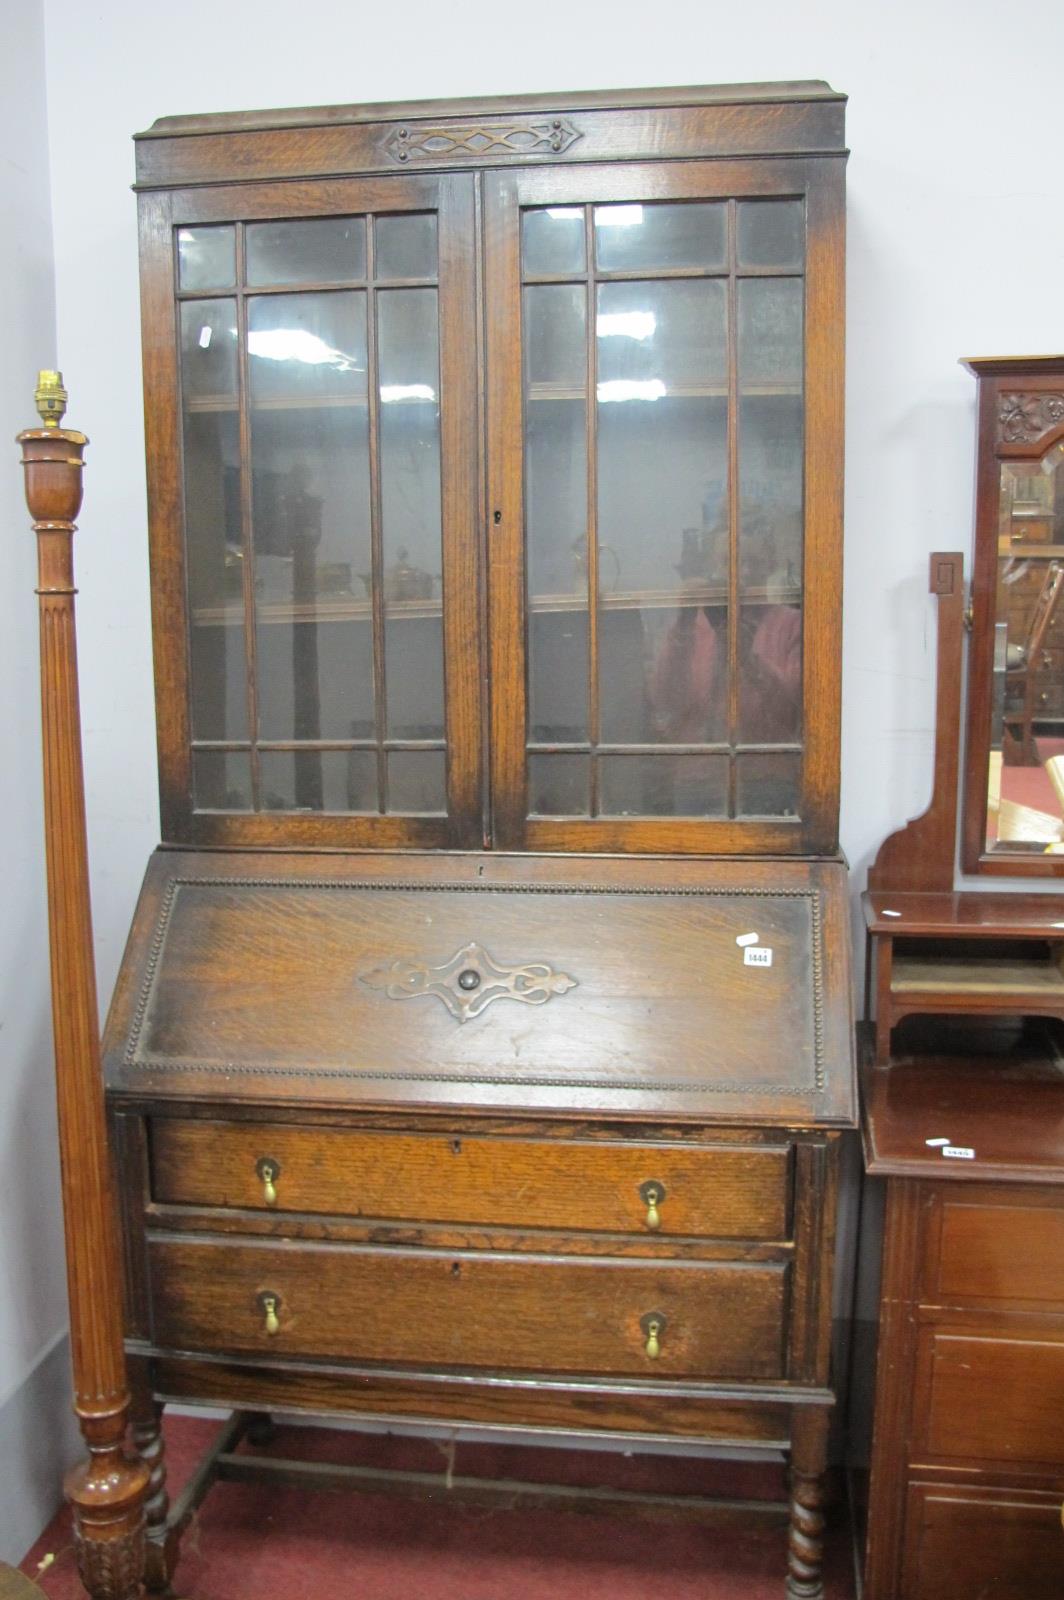 A 1920's Oak Bureau Bookcase with Astragal Glazed Doors, fall front over two drawers on barley twist